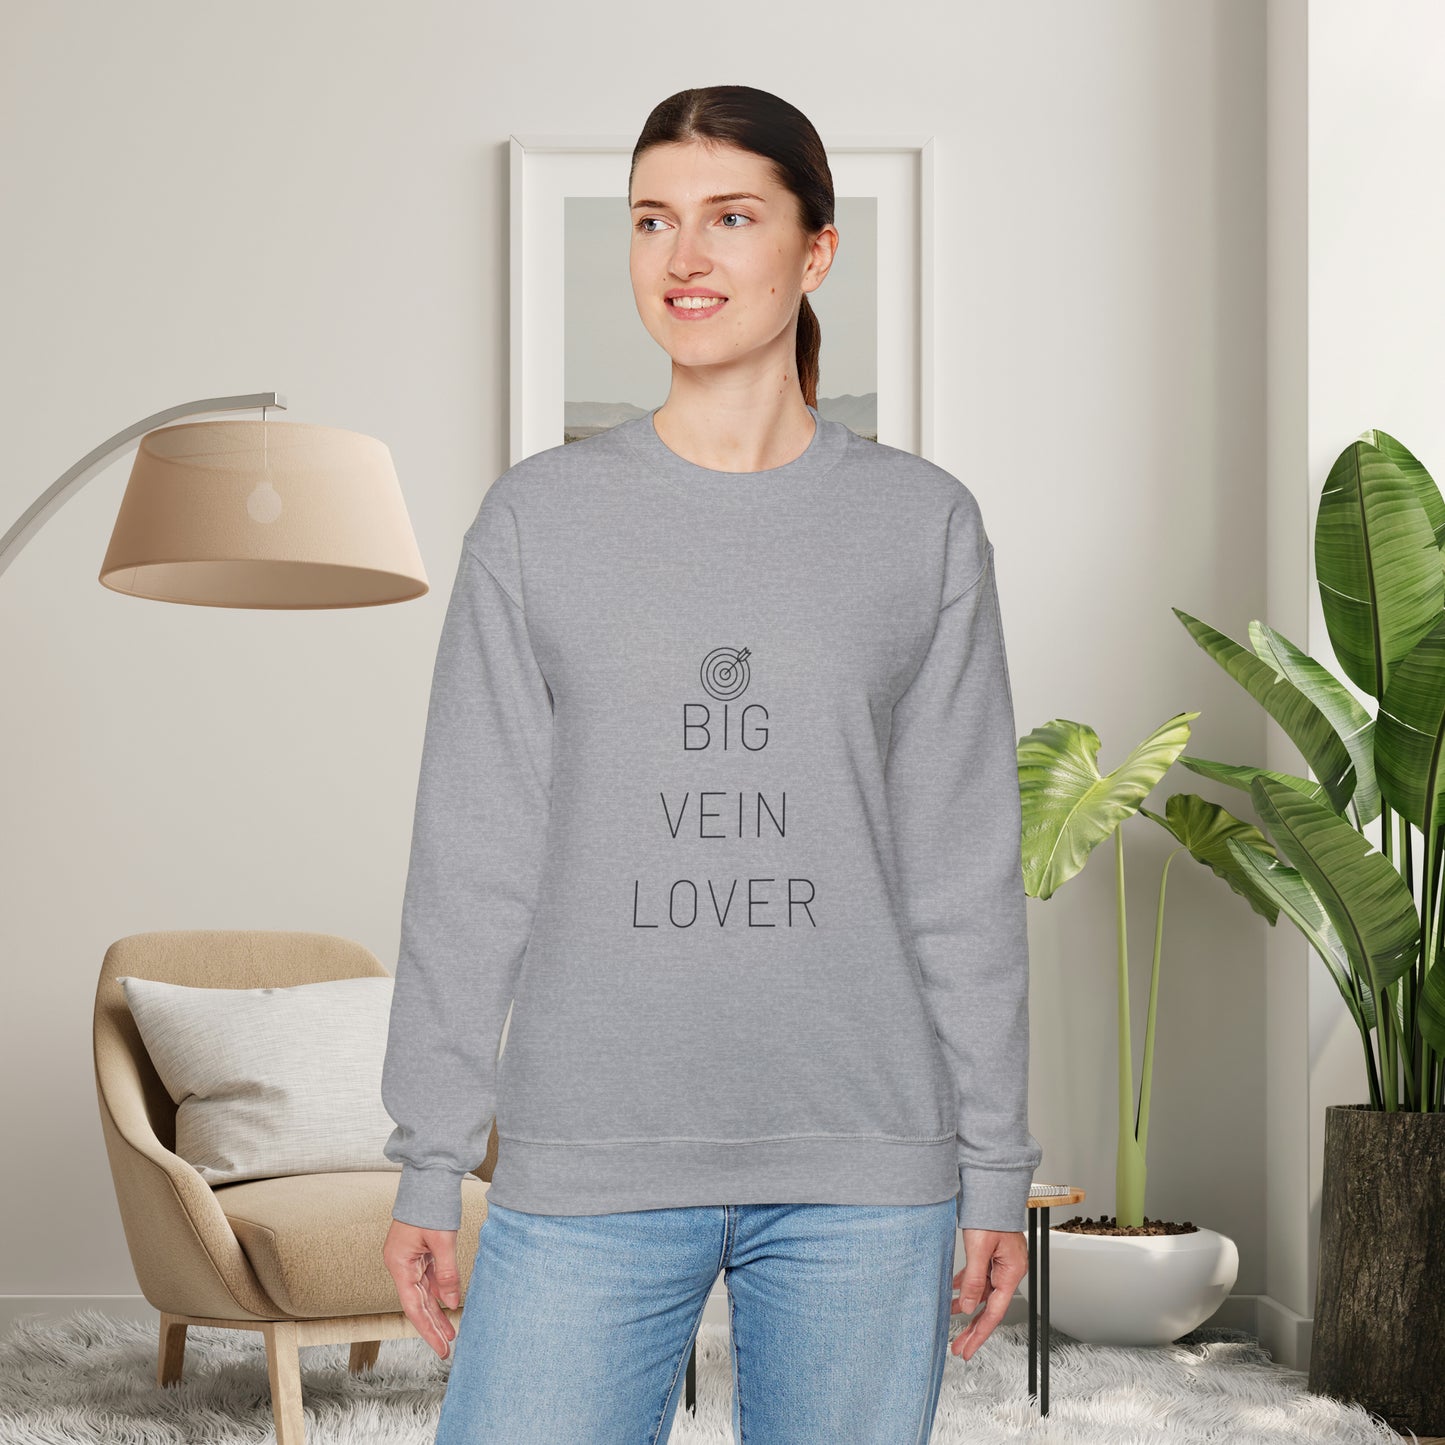 Nurse Angela designed this for cozying up, enjoy this “BIG VEIN LOVER” sweatshirt. Give the gift of this Unisex Heavy Blend™ Crewneck Sweatshirt or get one for yourself.